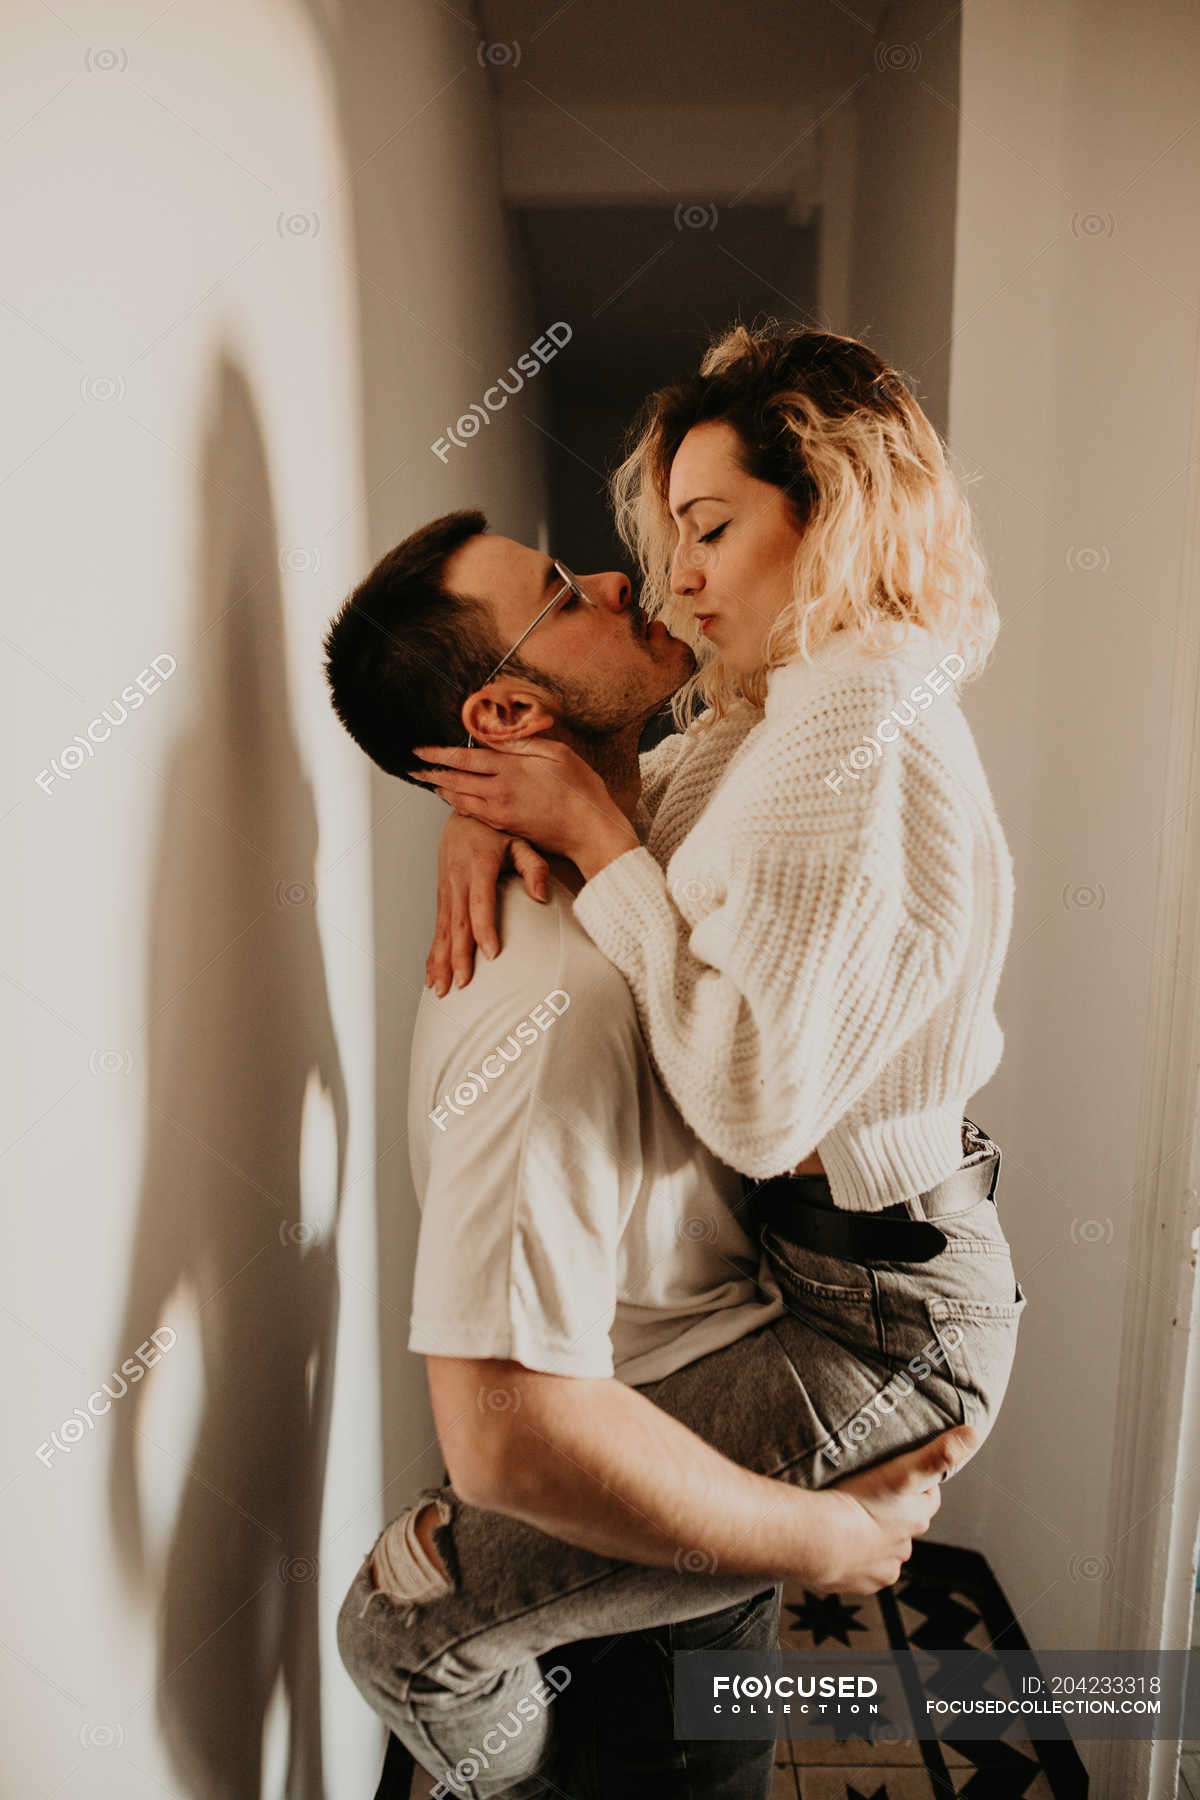 https://st.focusedcollection.com/9163412/i/1800/focused_204233318-stock-photo-passionate-man-woman-embracing-kissing.jpg